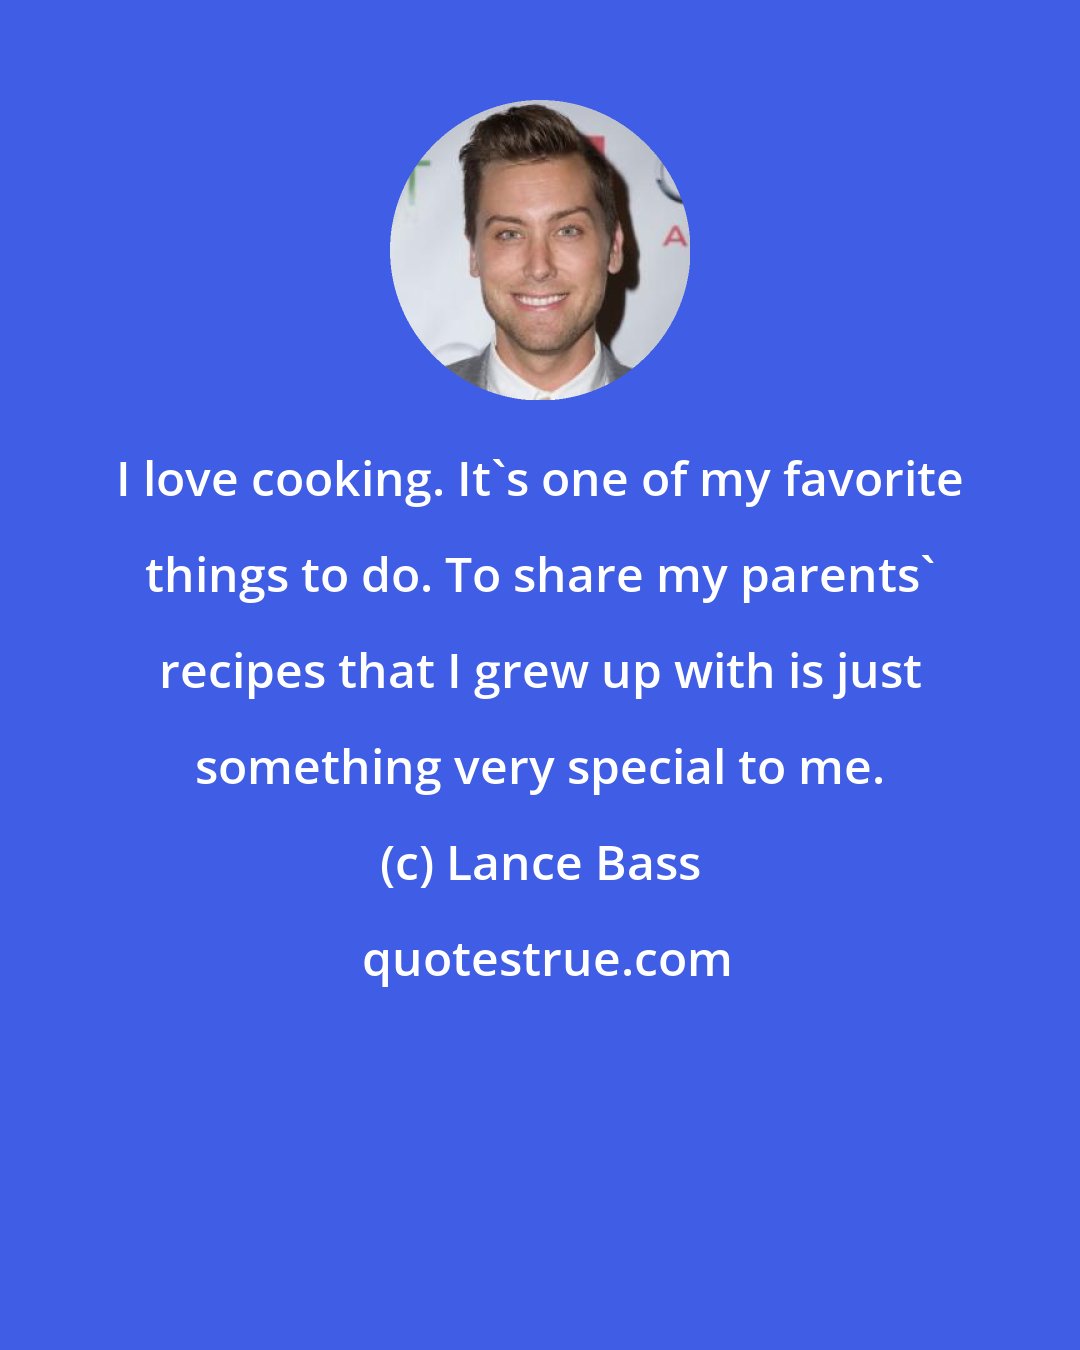 Lance Bass: I love cooking. It's one of my favorite things to do. To share my parents' recipes that I grew up with is just something very special to me.